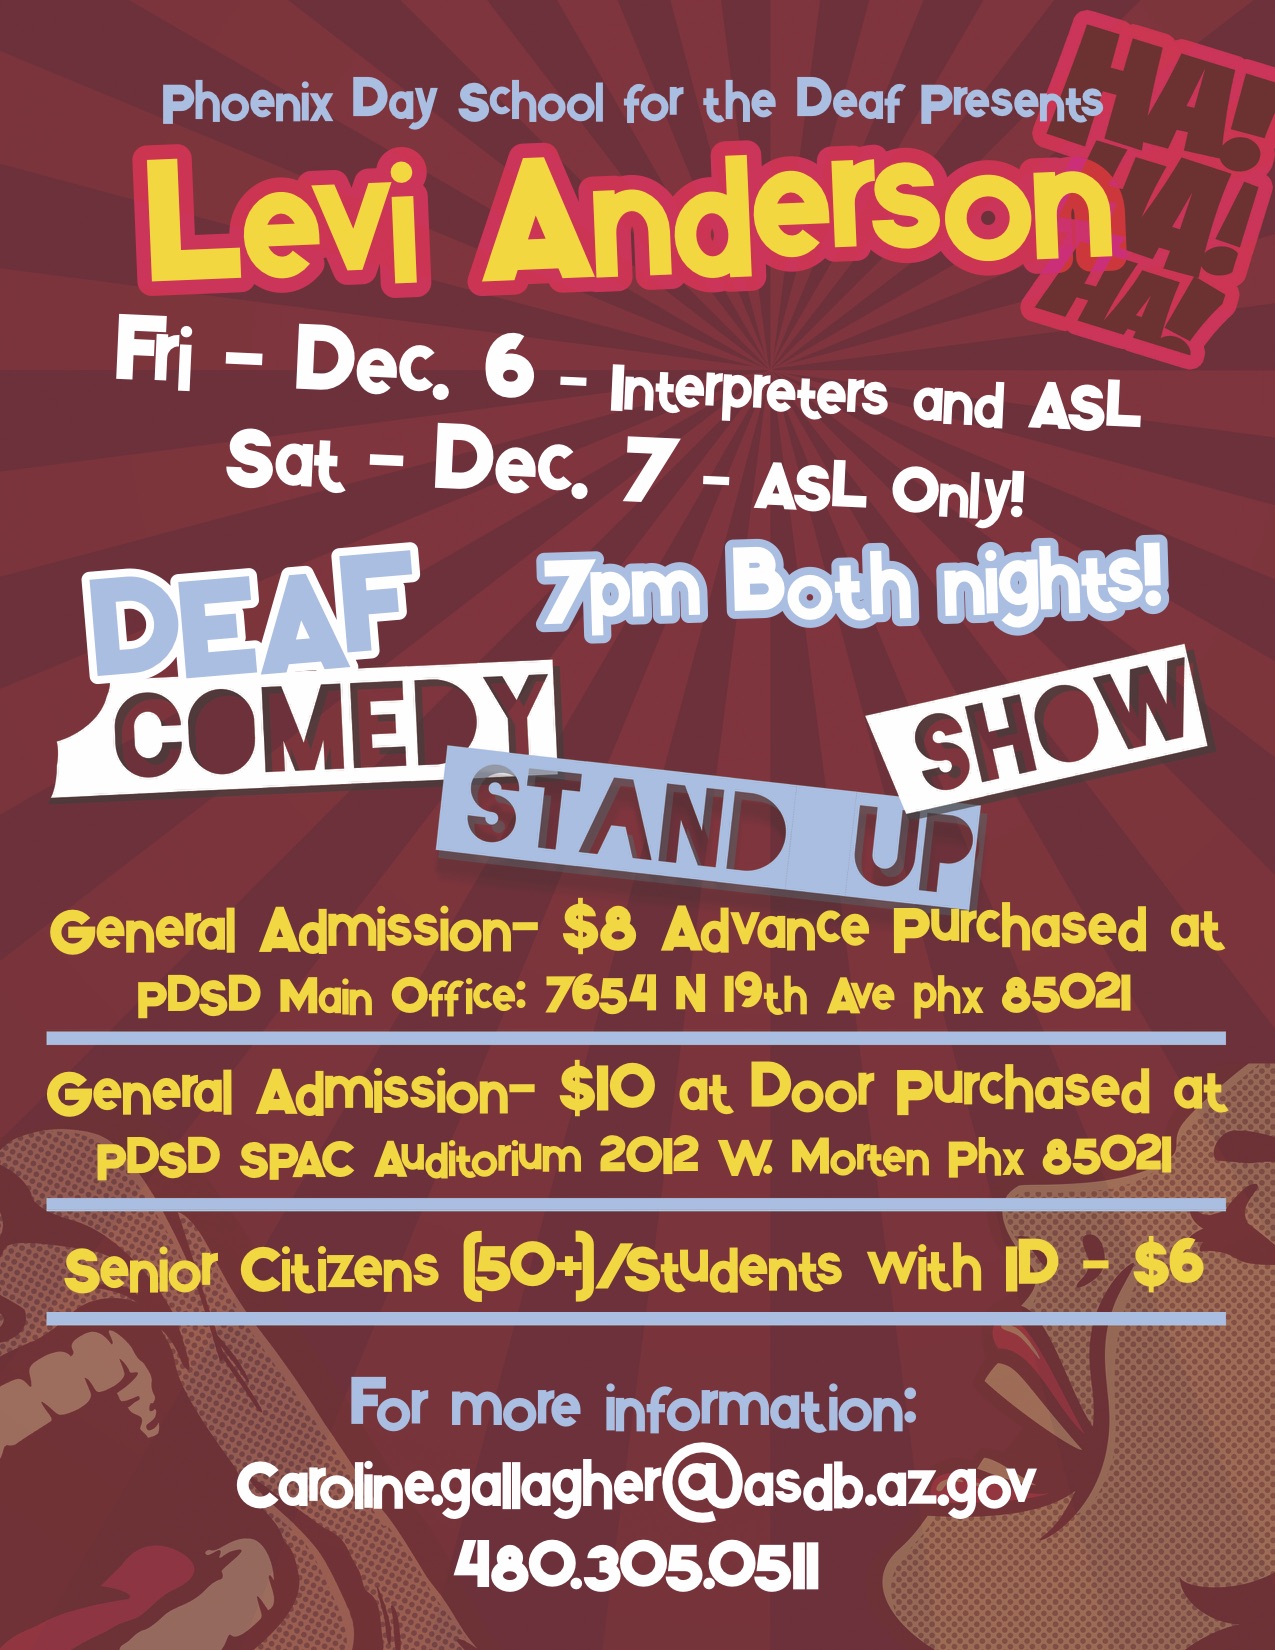 Phoenix Day School for the Deaf presents Levi Anderson. Friday - December 6 - Interpreters and ASL. Saturday, December 7 - ASL Only! 7pm both nights! Deaf Comedy Stand Up Show. General Admission - $8 Advance Purchased at PDSD Main Office: 7654 N. 19th Ave. Phoenix 85021. General Admission - $10 at door purchased at PDSD SPAC Auditorim 2012 W. Morten Phoenix 85021. Senior Citizens (50+) and students with ID - $6. For more information, contact caroline.gallagher@asdb.az.gov. or 480 305-0511.